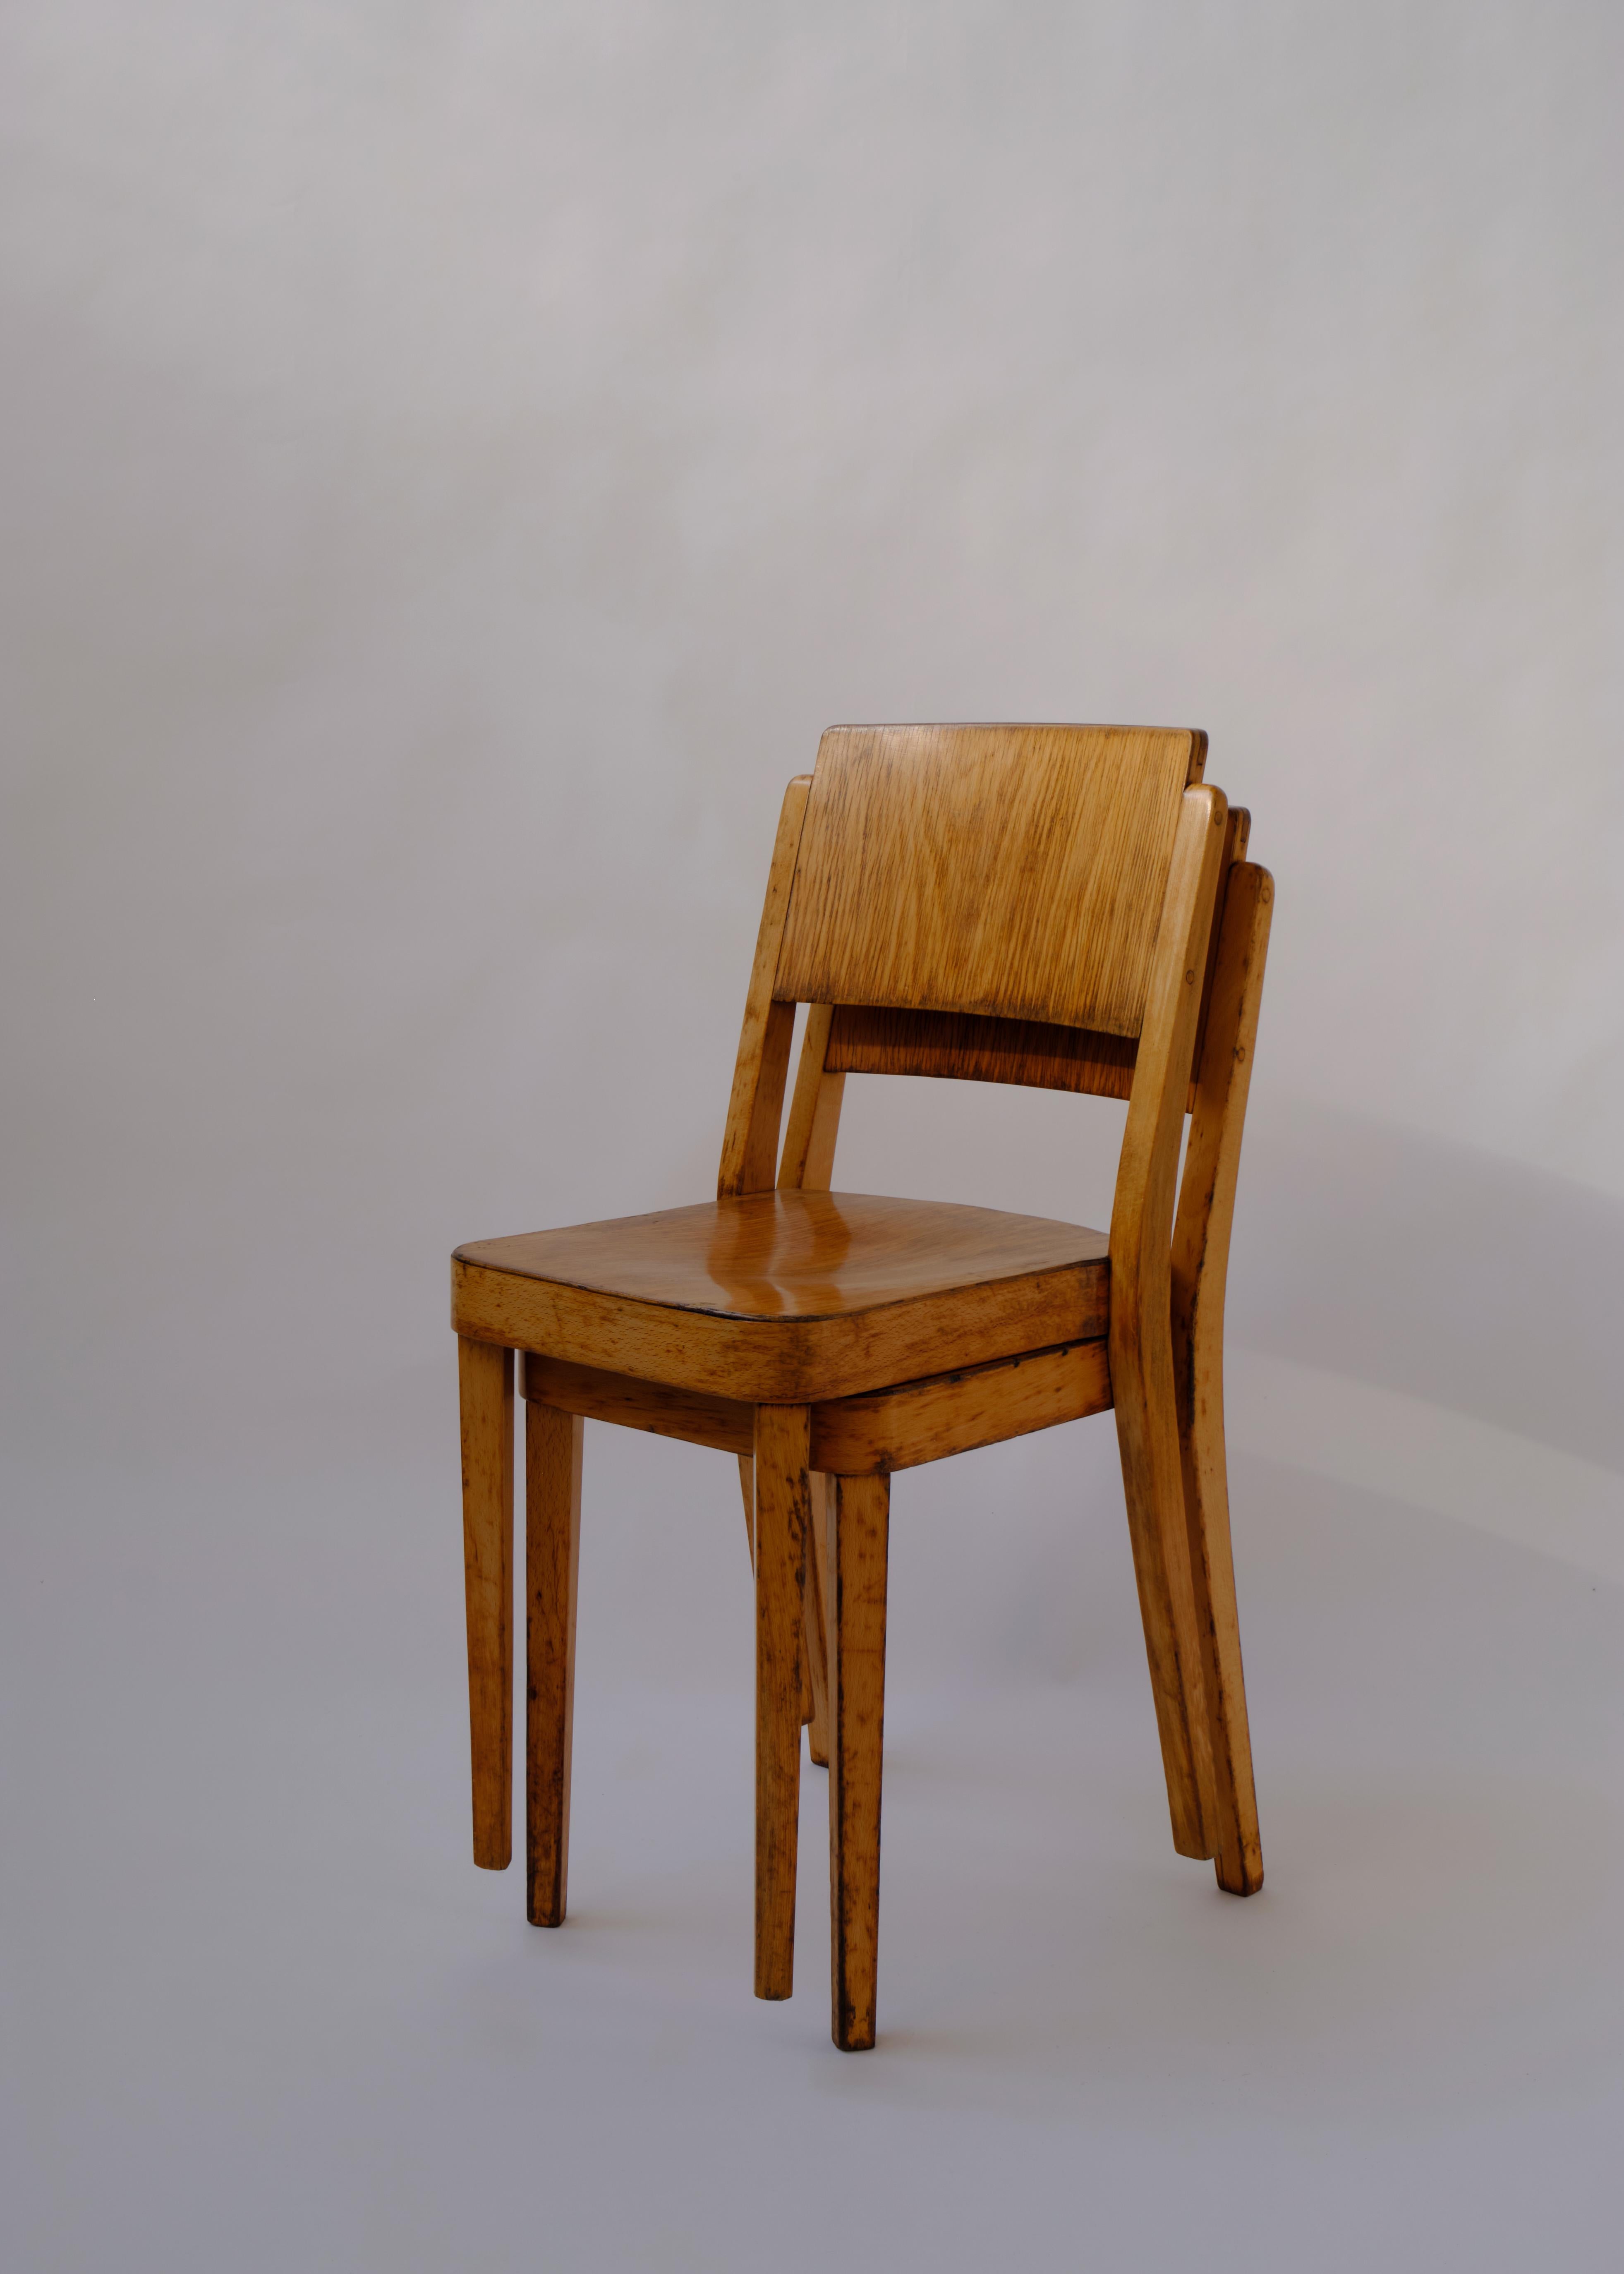 Thonet’s Montana Chair, model number A 1250 fabricated from solid birch and plywood.  Light and stackable design.

Sold as a pair.

The label on both chairs was first used in 1922 and the chairs can be seen in Thonet’s catalogue from 1930 placing